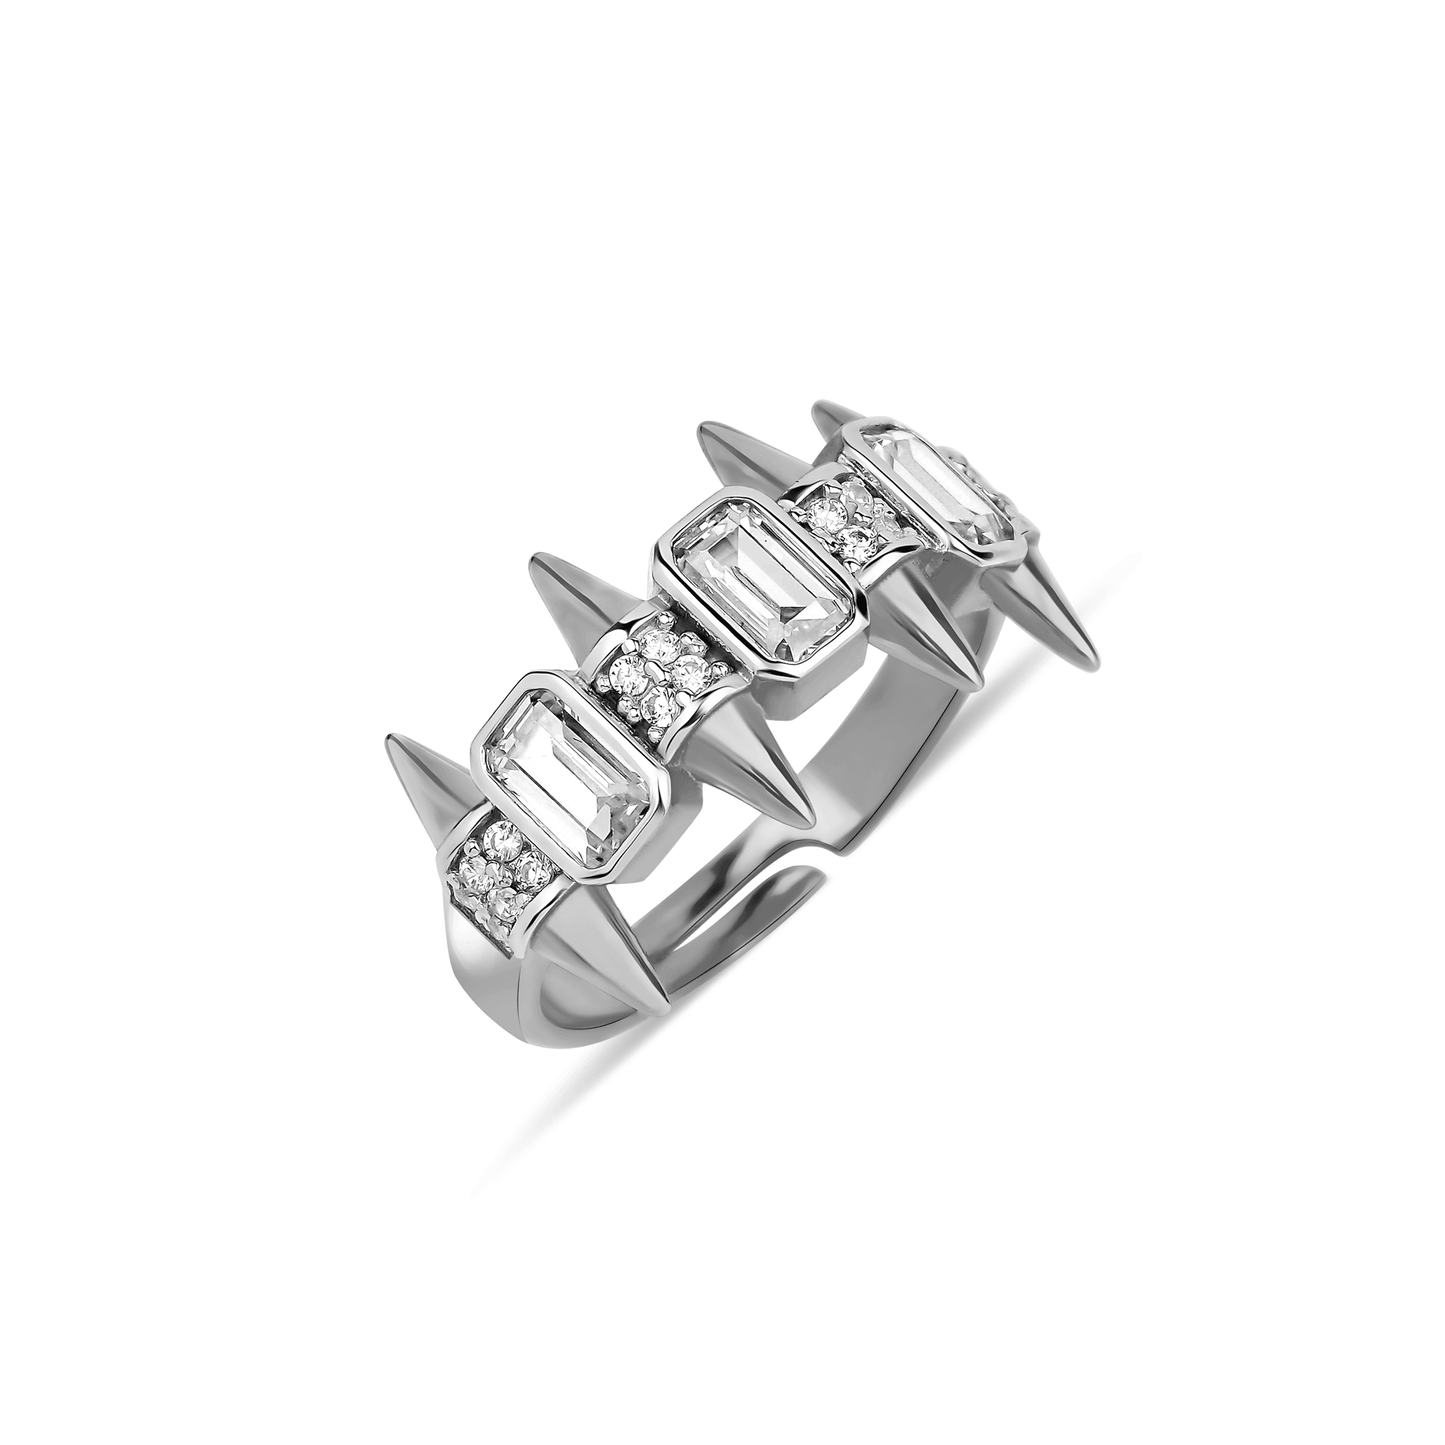 Pointed Model Adjustable Silver Ring with Rows of Stones